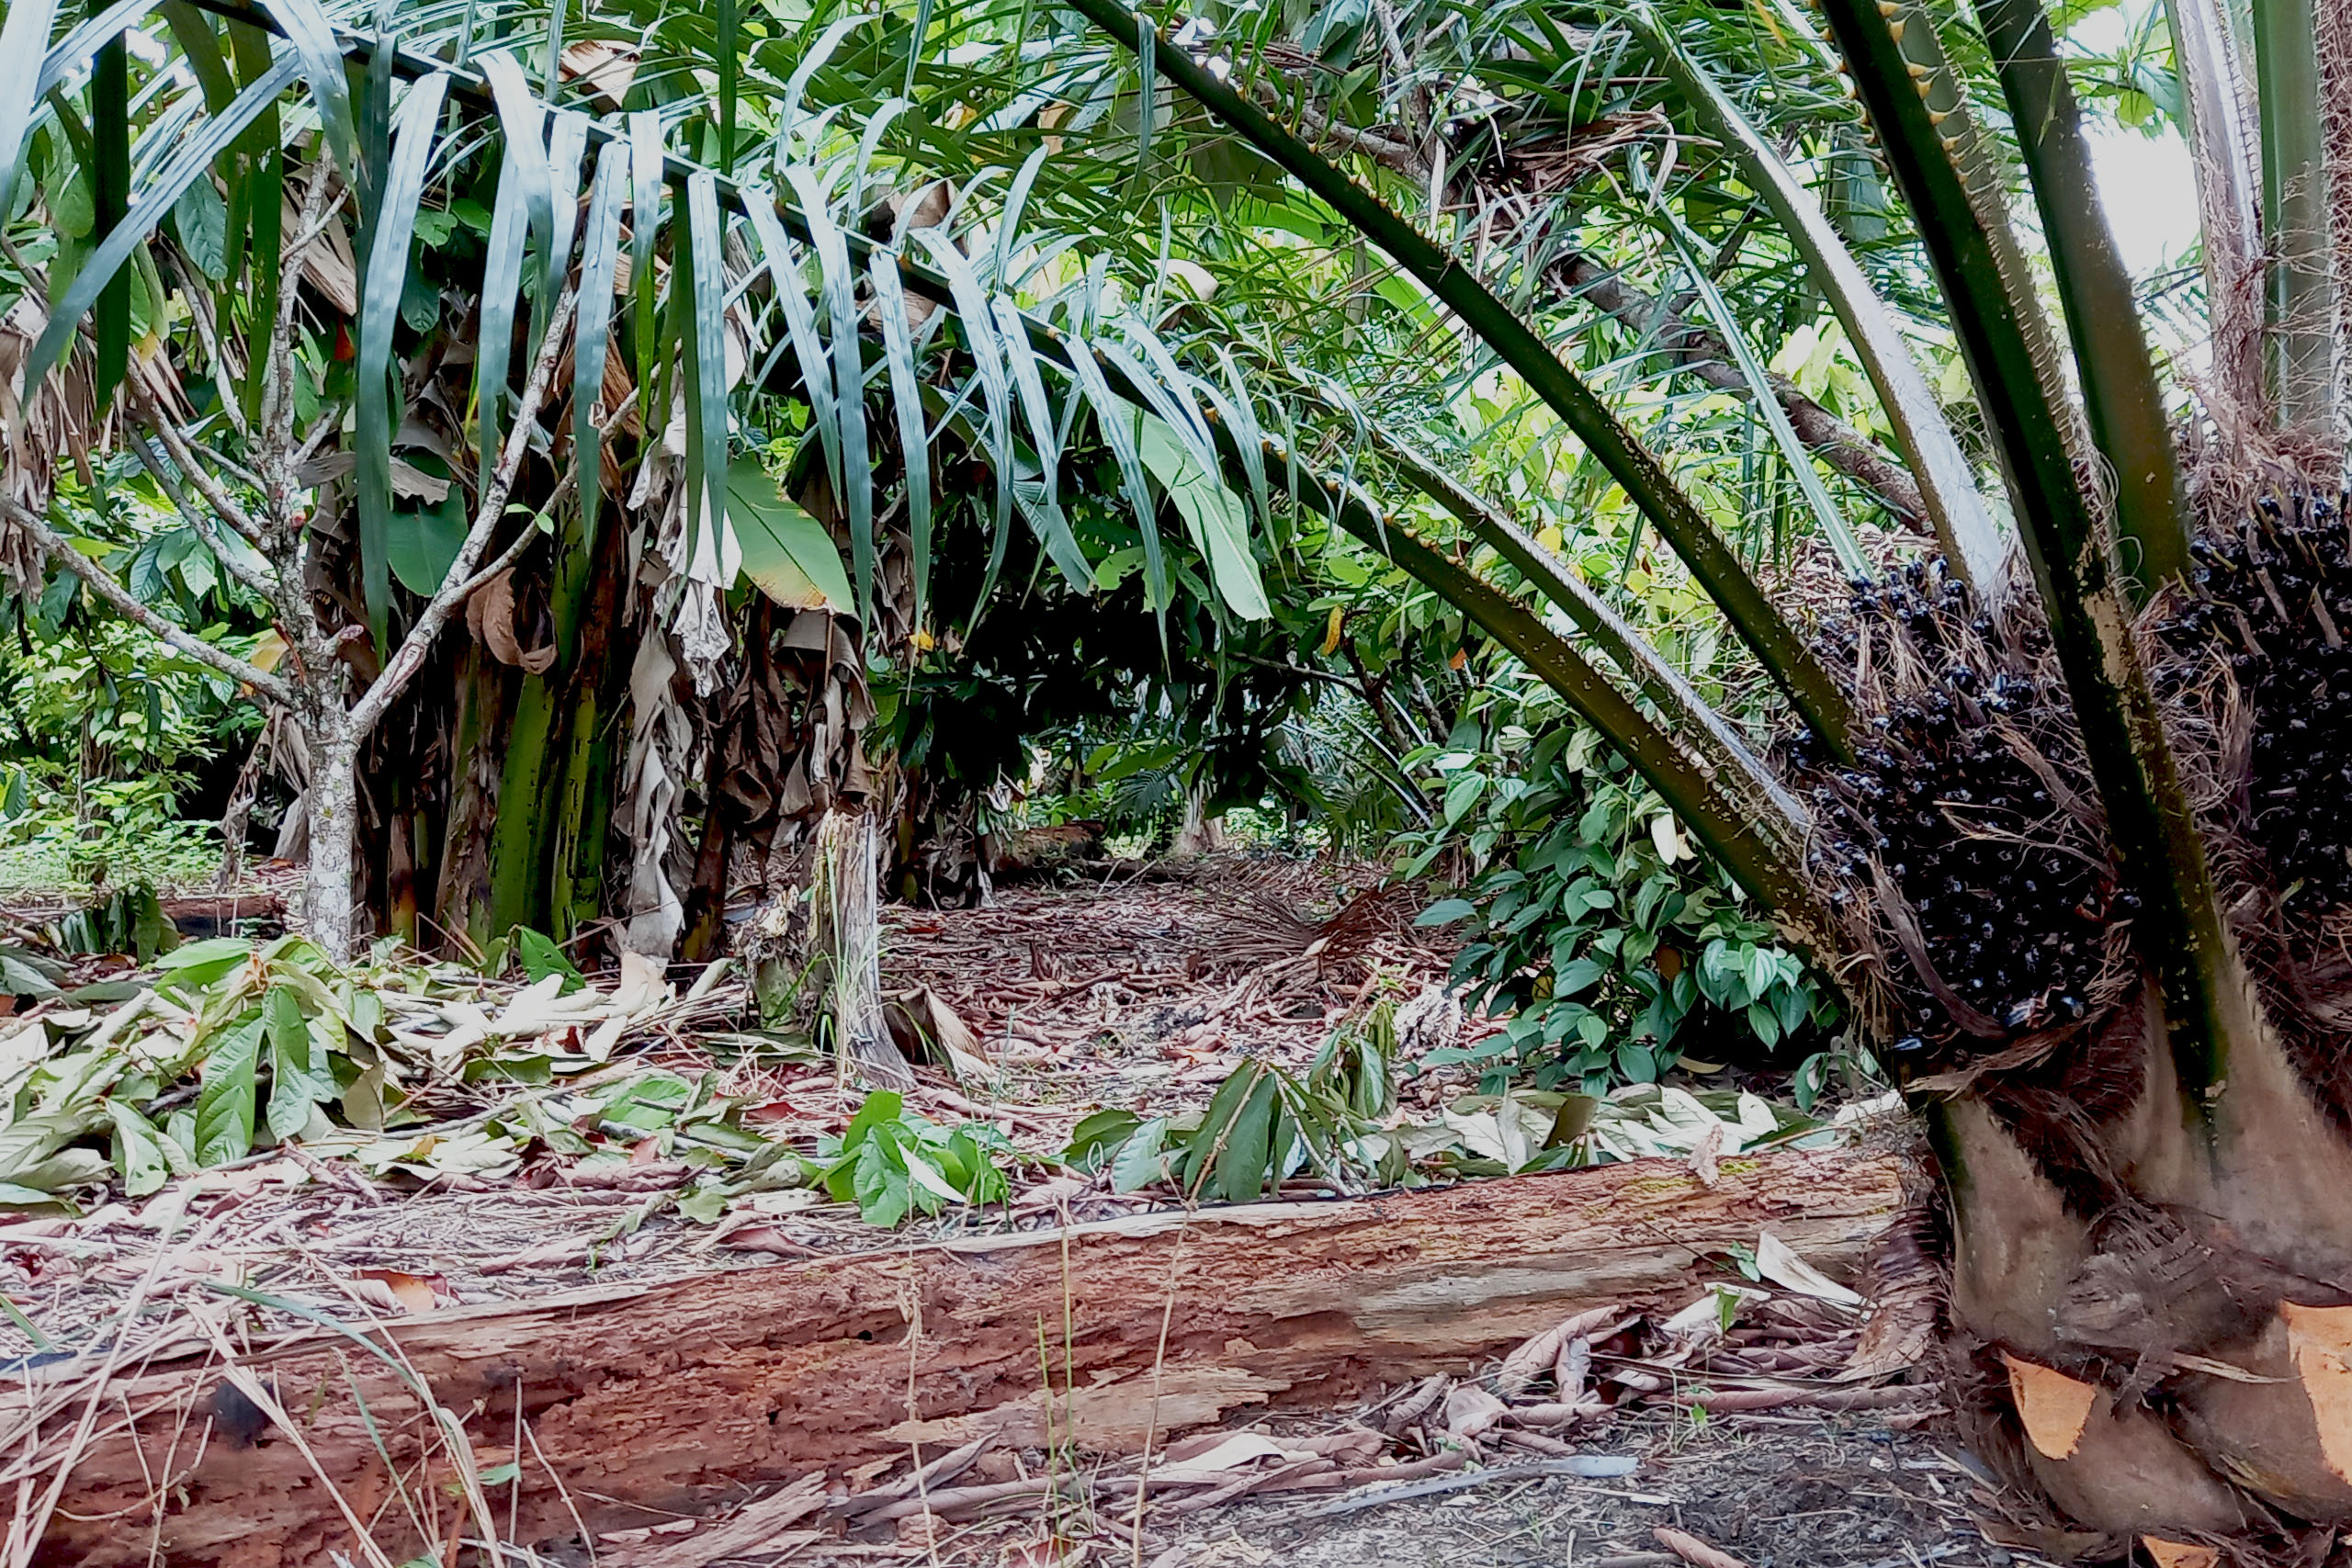 : Different species are planted alongside oil palms for the specific purpose of producing biomass and enriching the soil in Brazil.